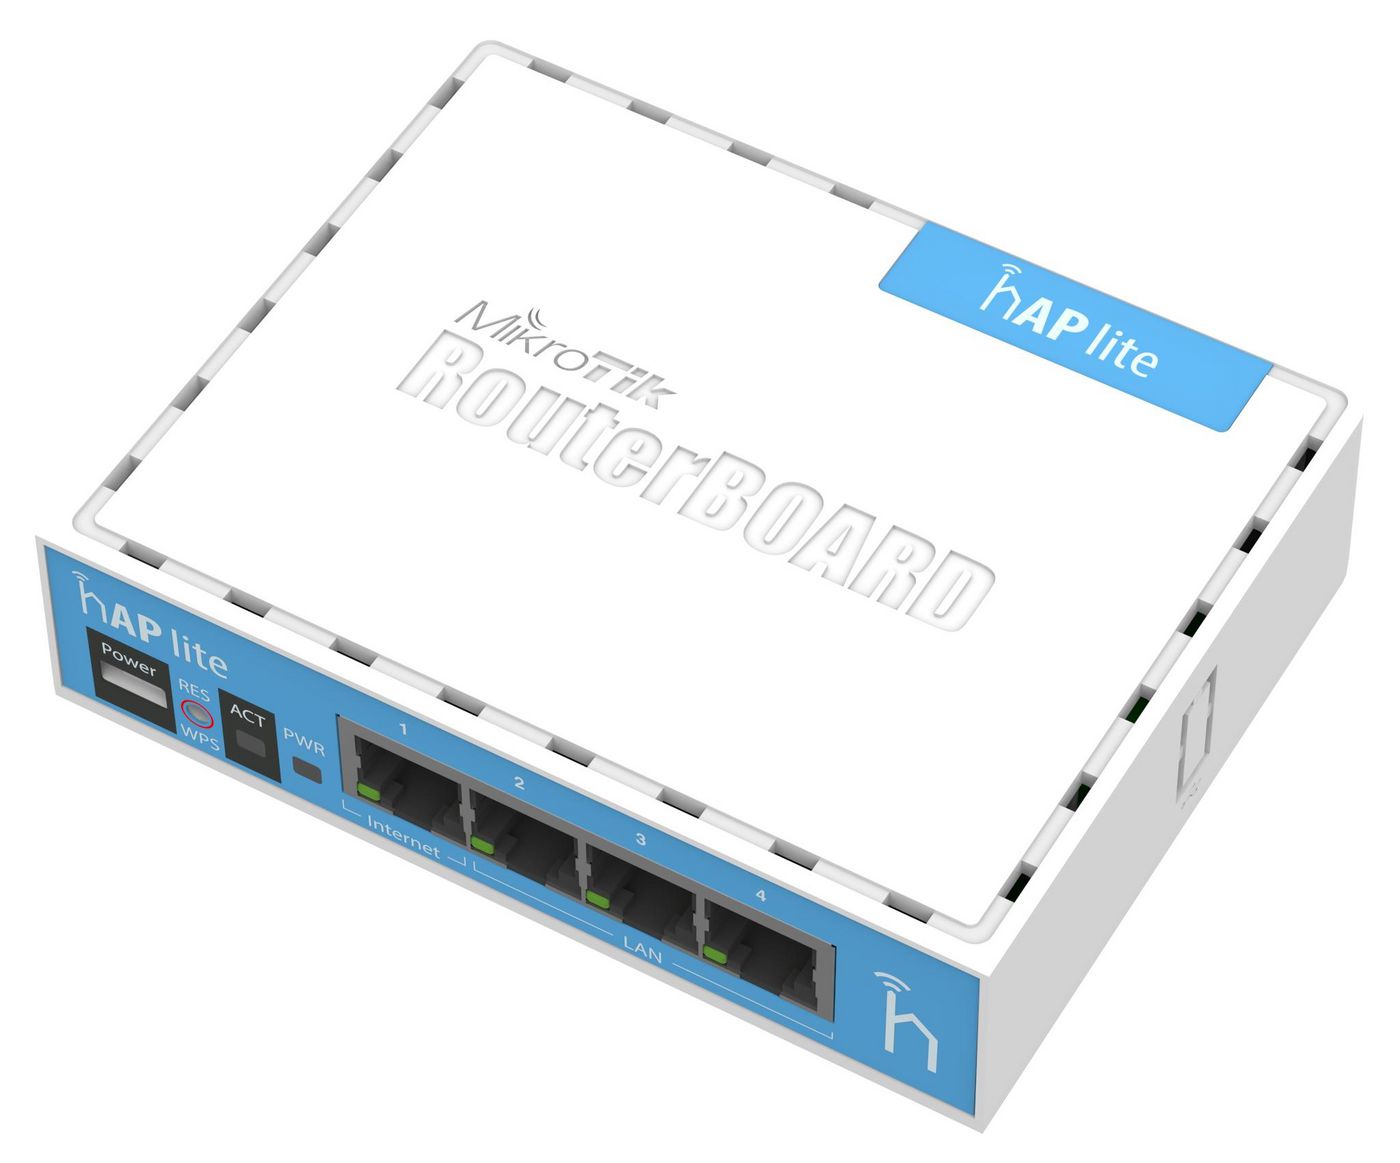 MikroTik RB941-2ND hAP lite with 650MHz CPU, 